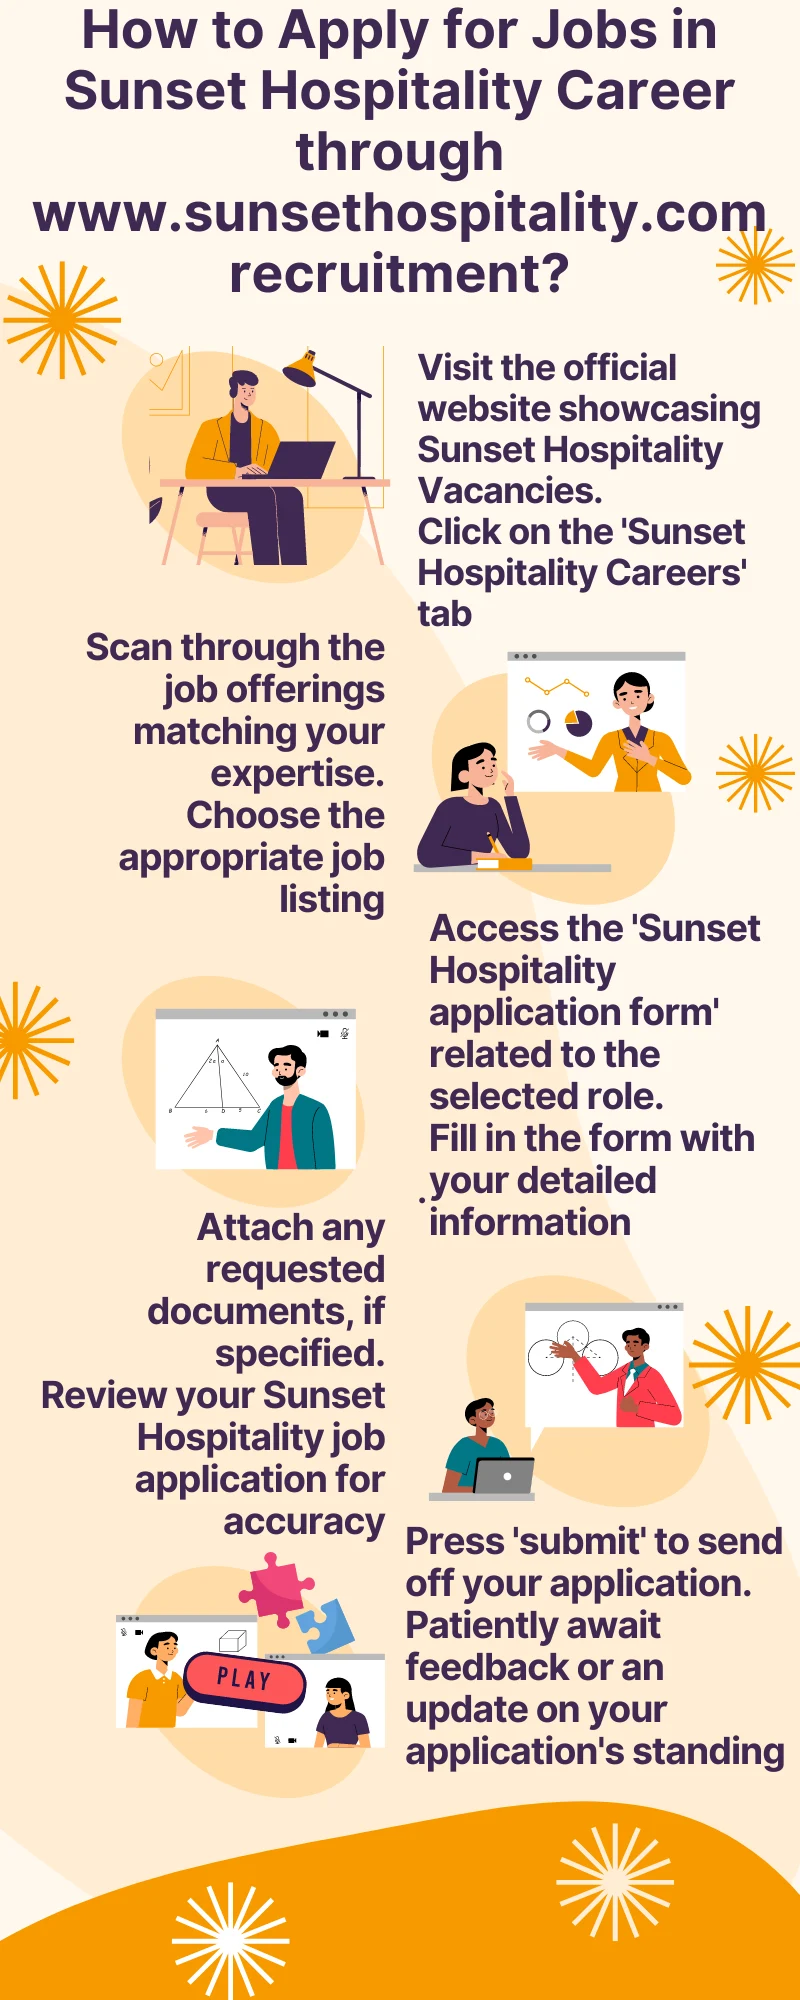 How to Apply for Jobs in Sunset Hospitality Career through www.sunsethospitality.com recruitment?